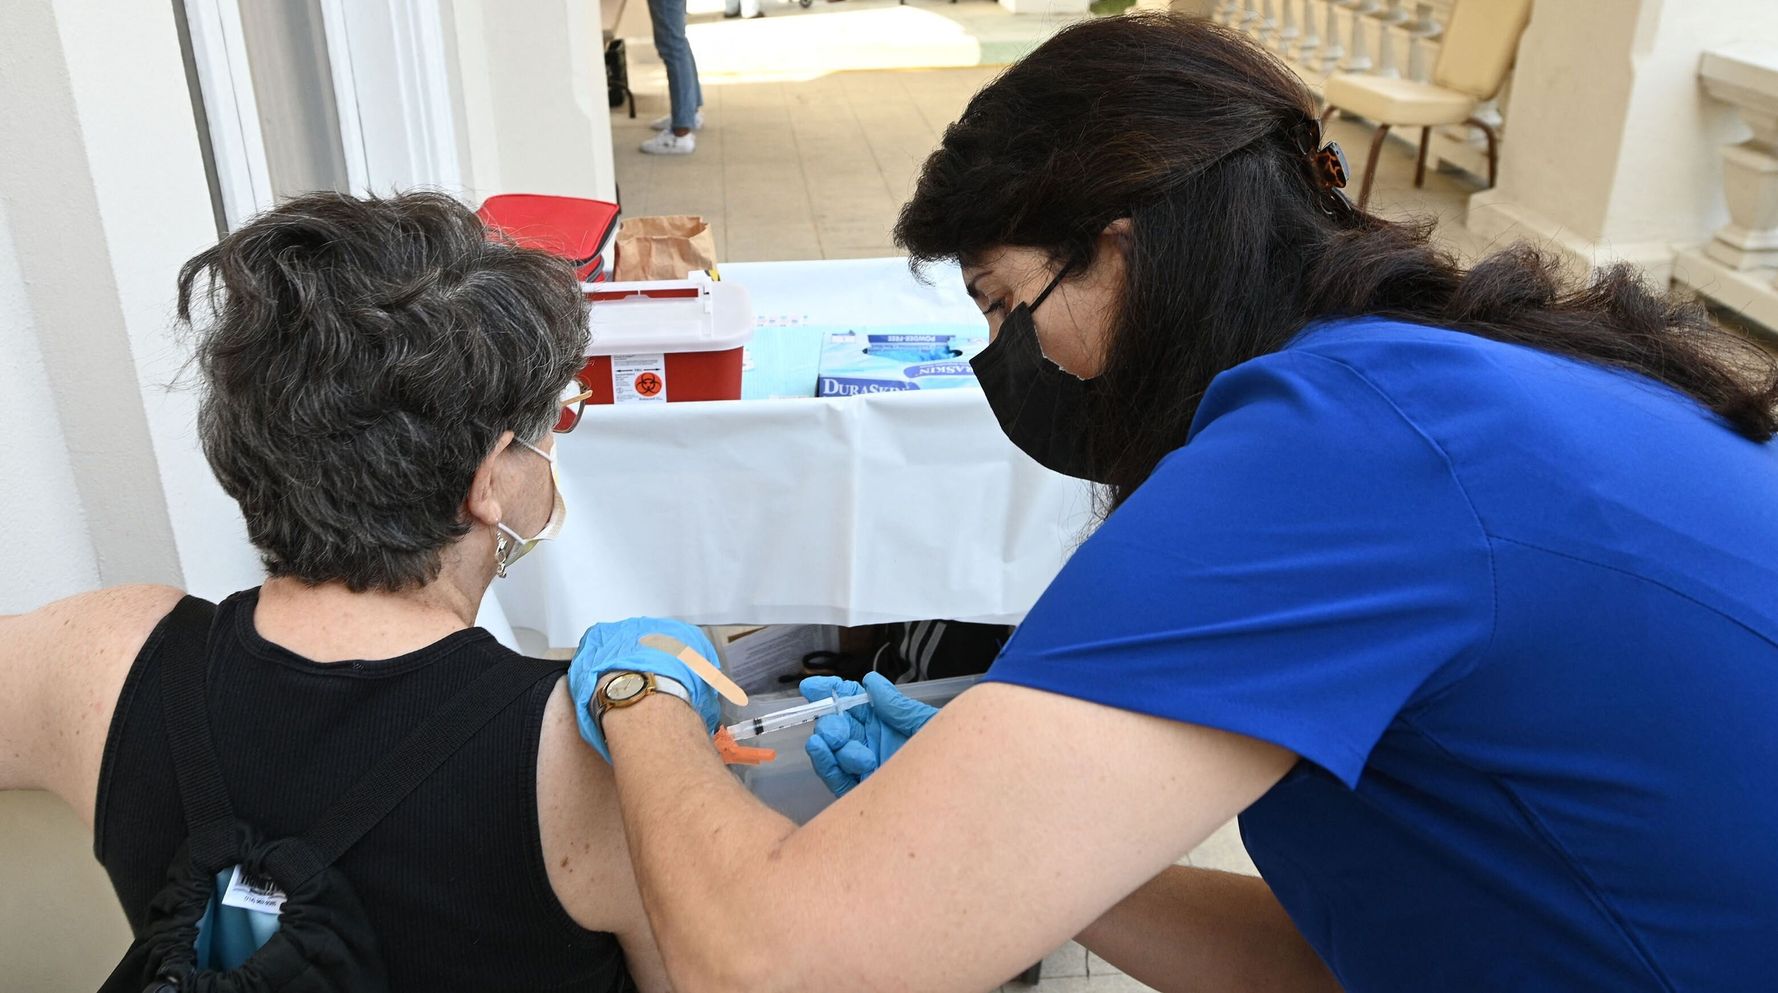 More Than 1 Million In The U.S. Got COVID-19 Vaccinations In 24 Hours, Highest In Weeks